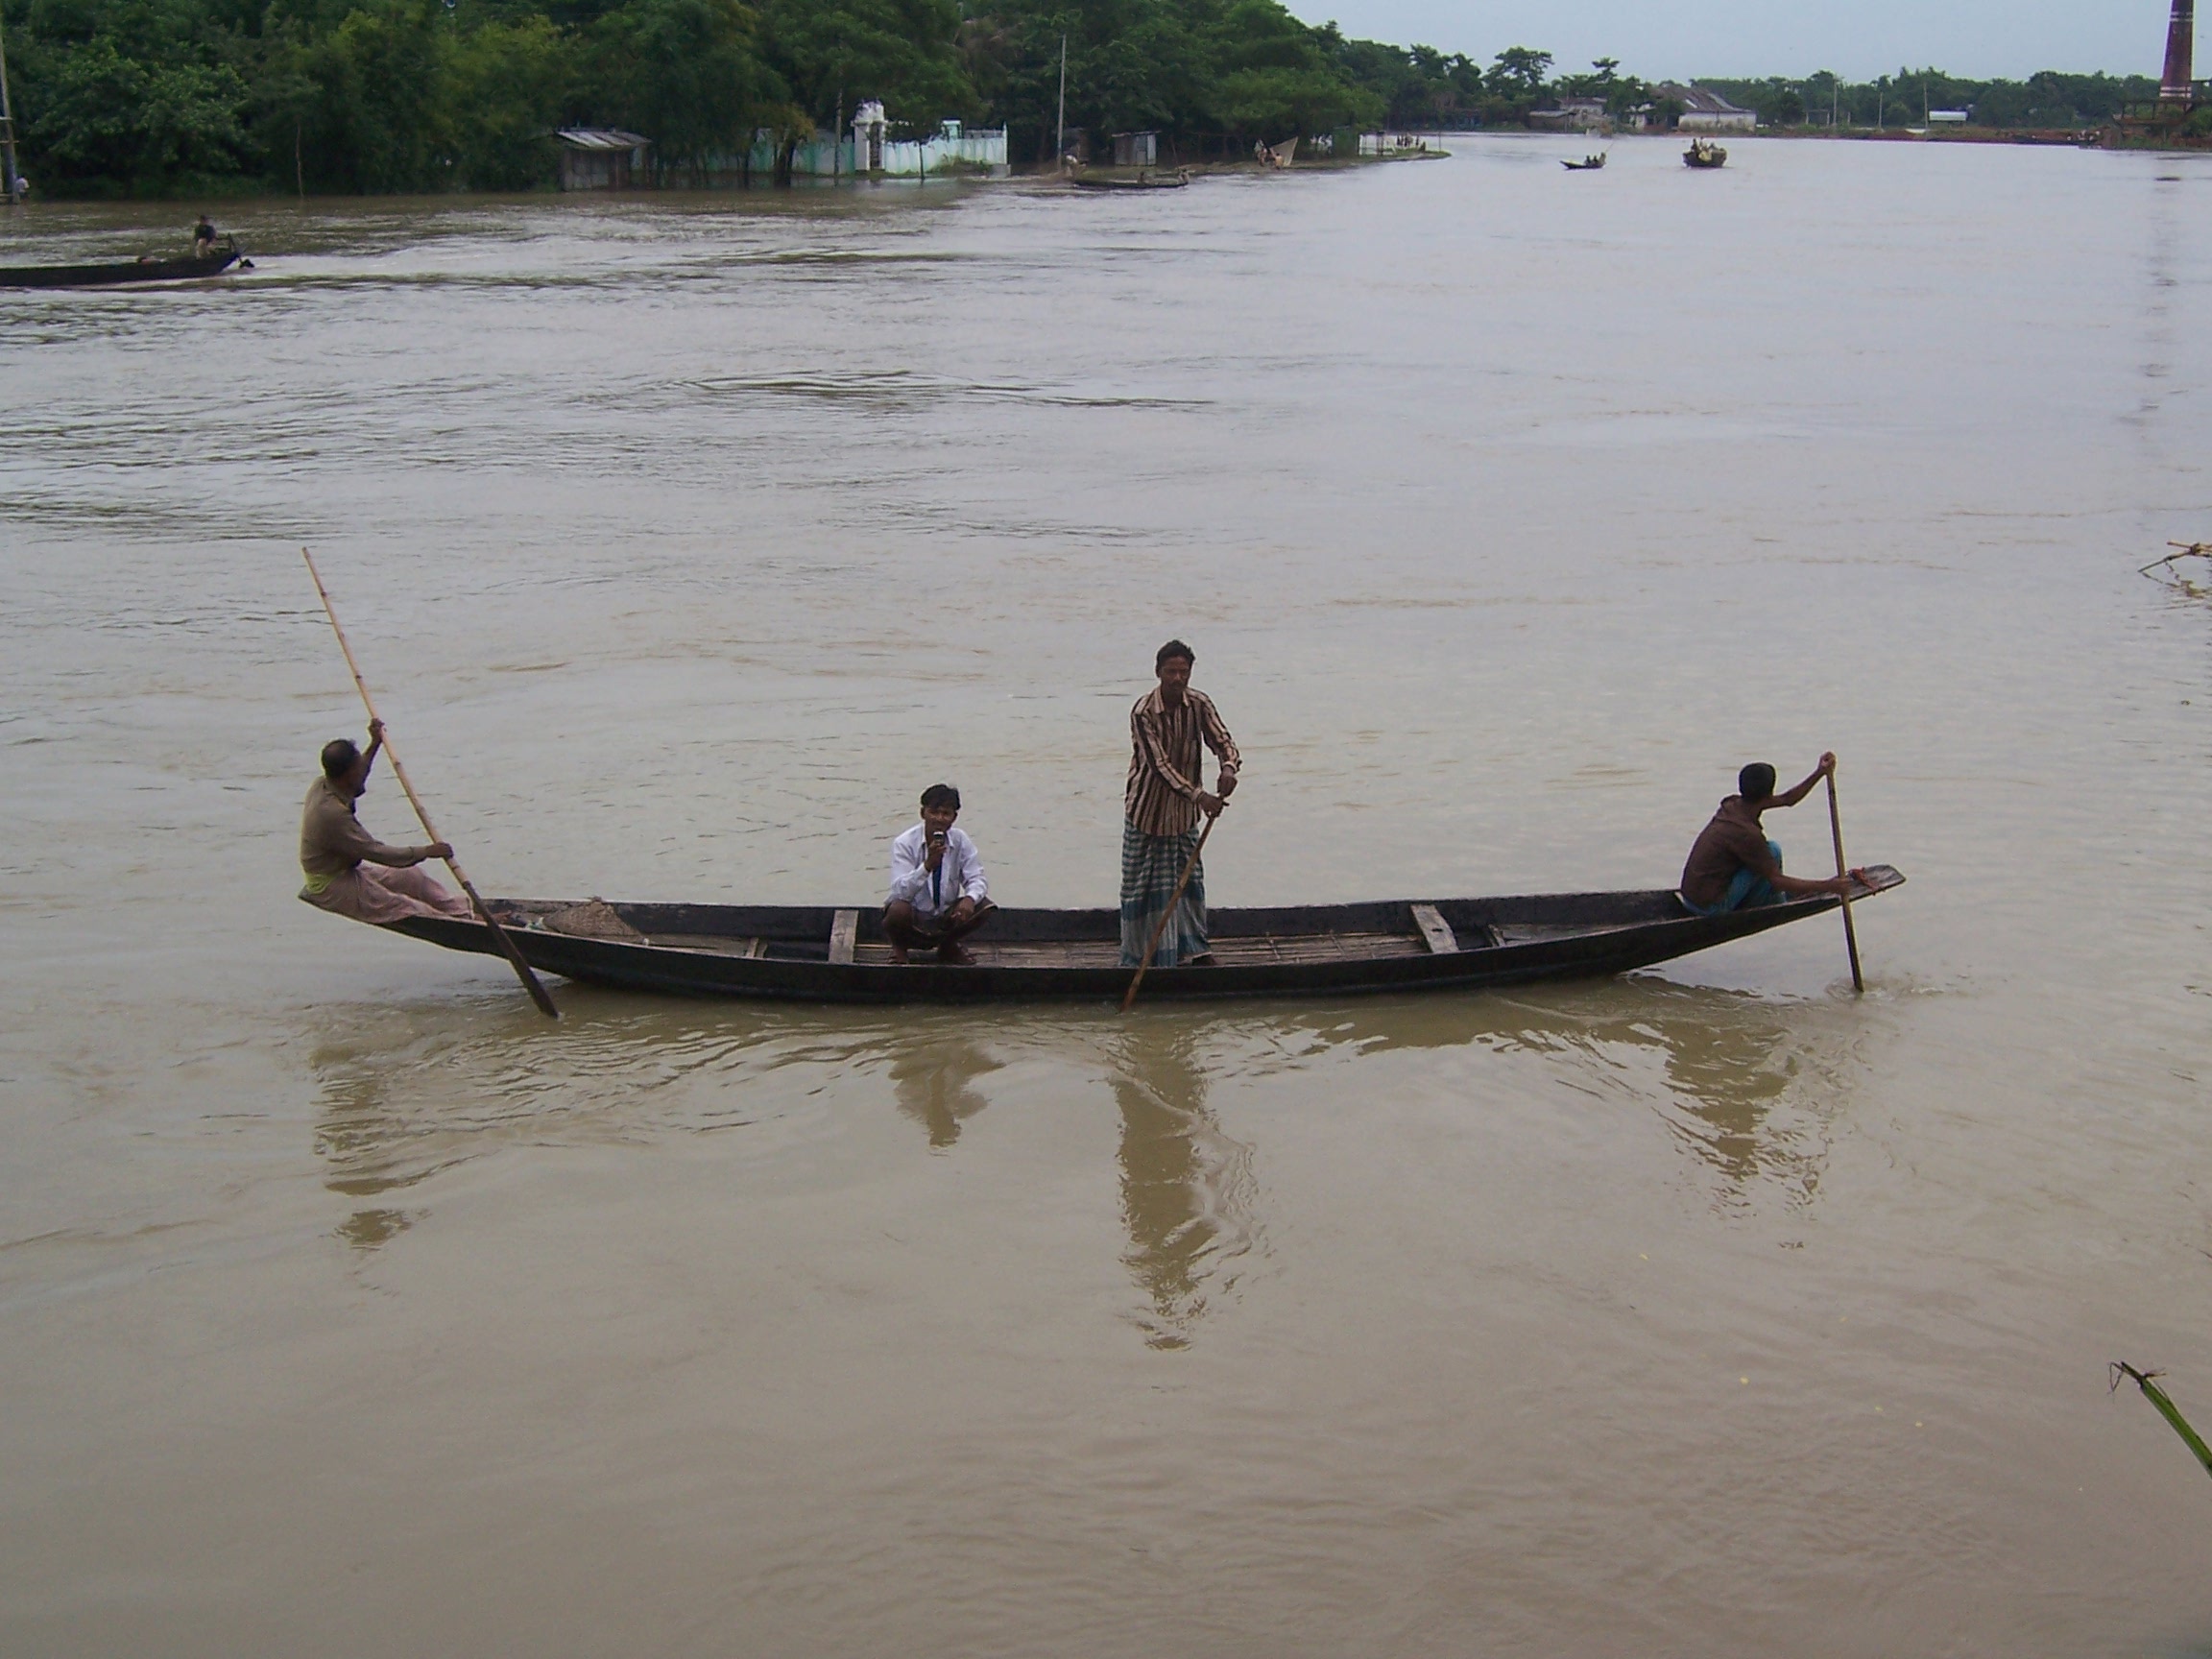 A man in a small river boat